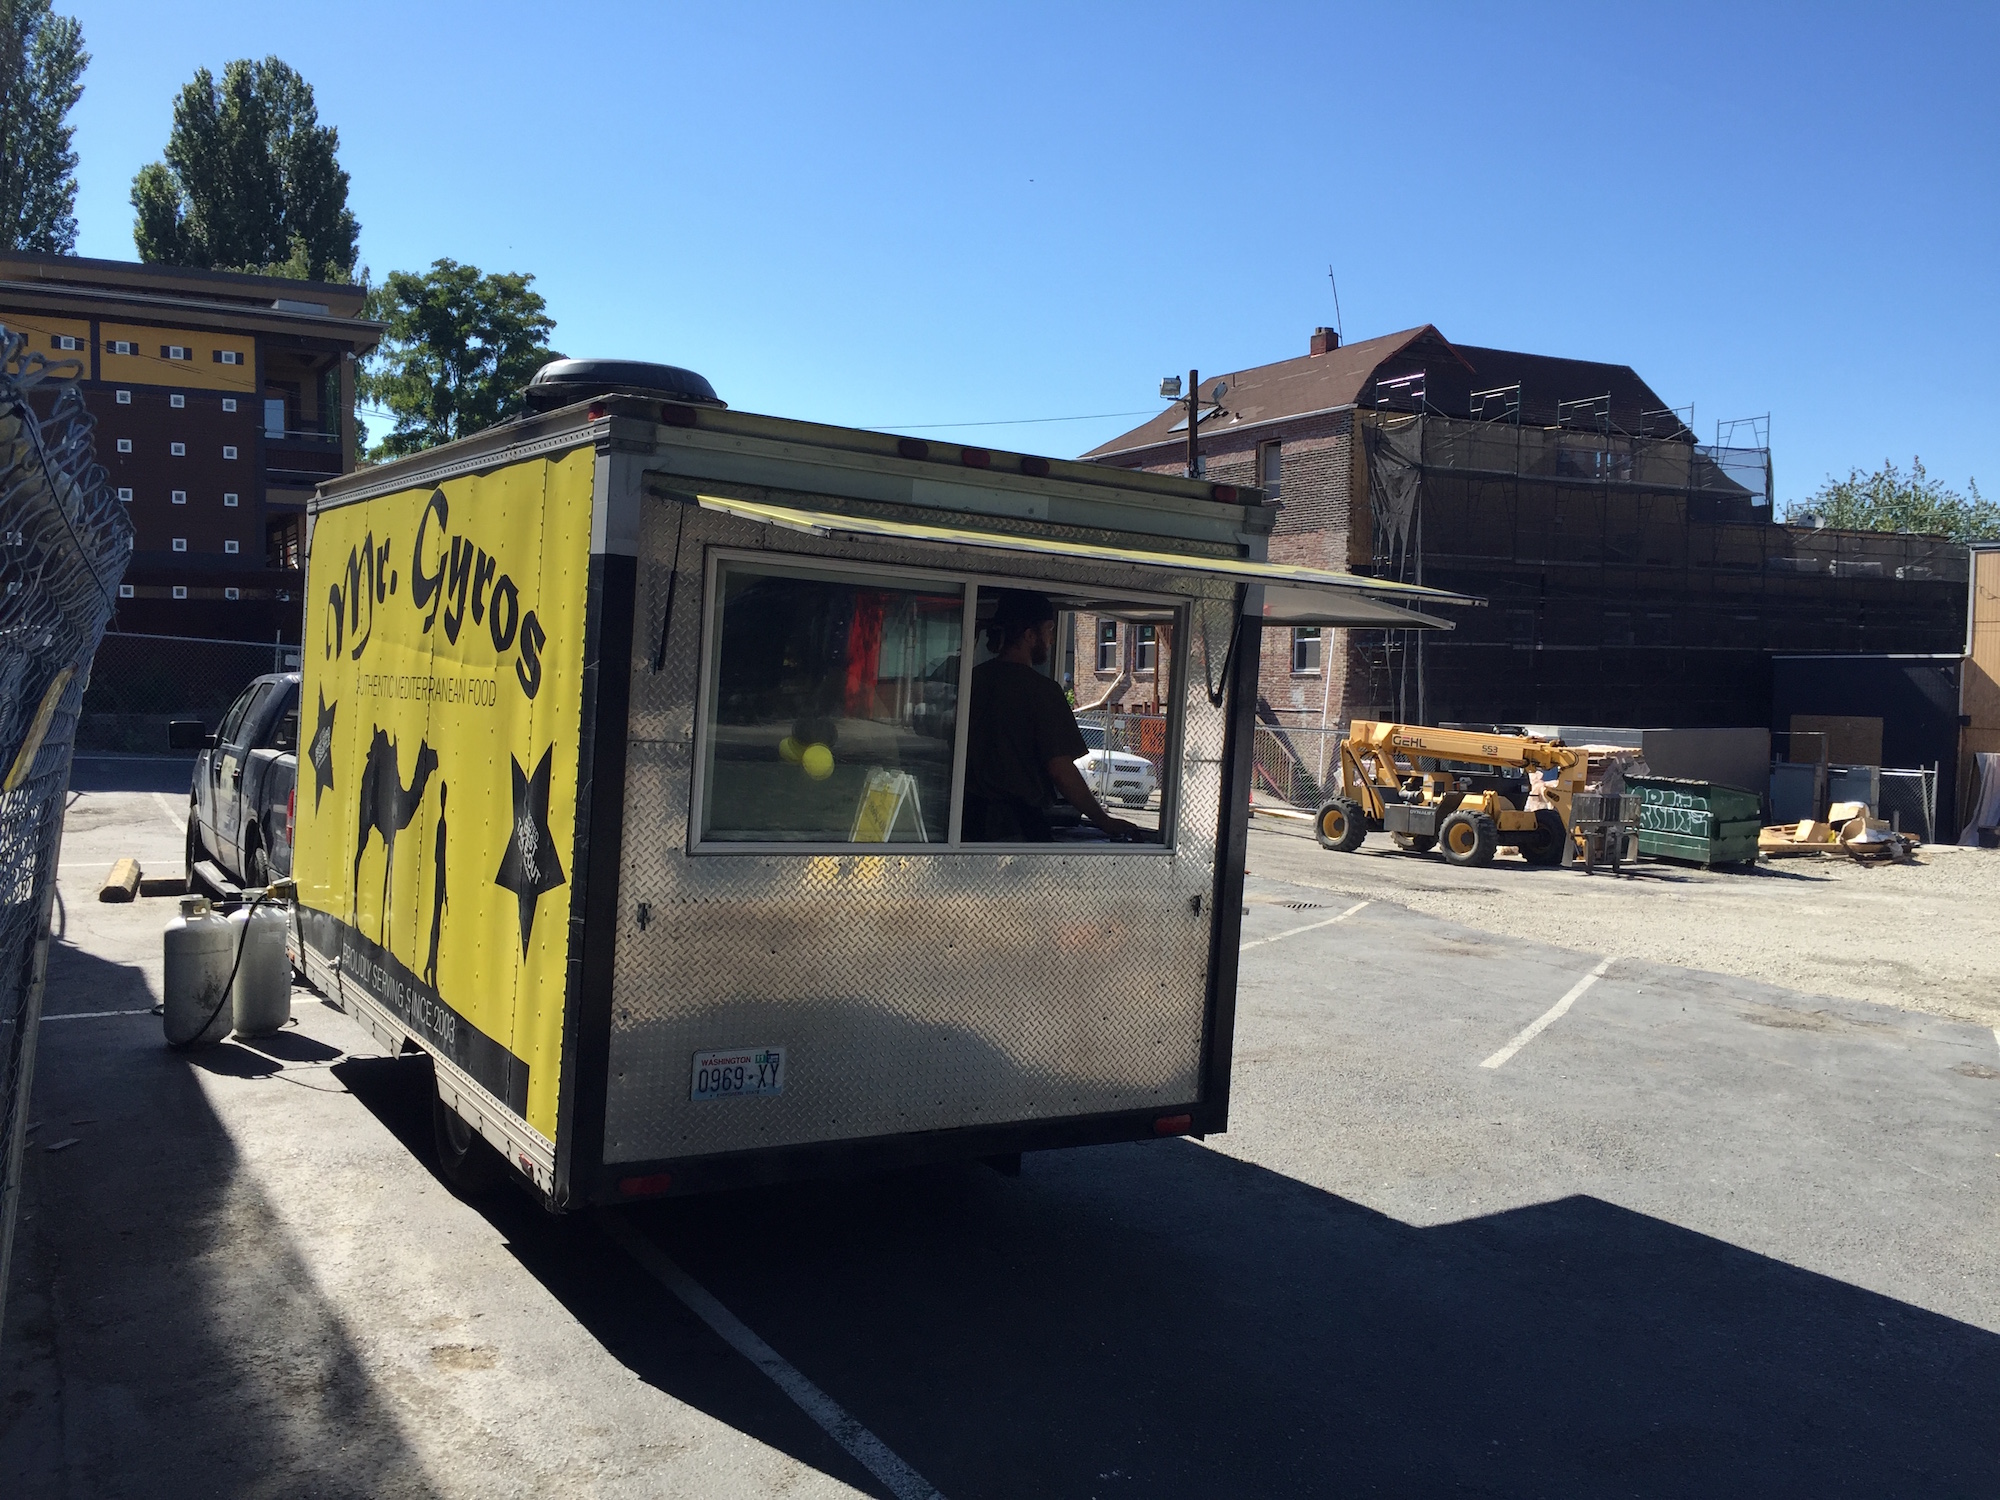 The Mr. Gyros truck overlooking its former brick and mortar home on Greenwood Ave N.